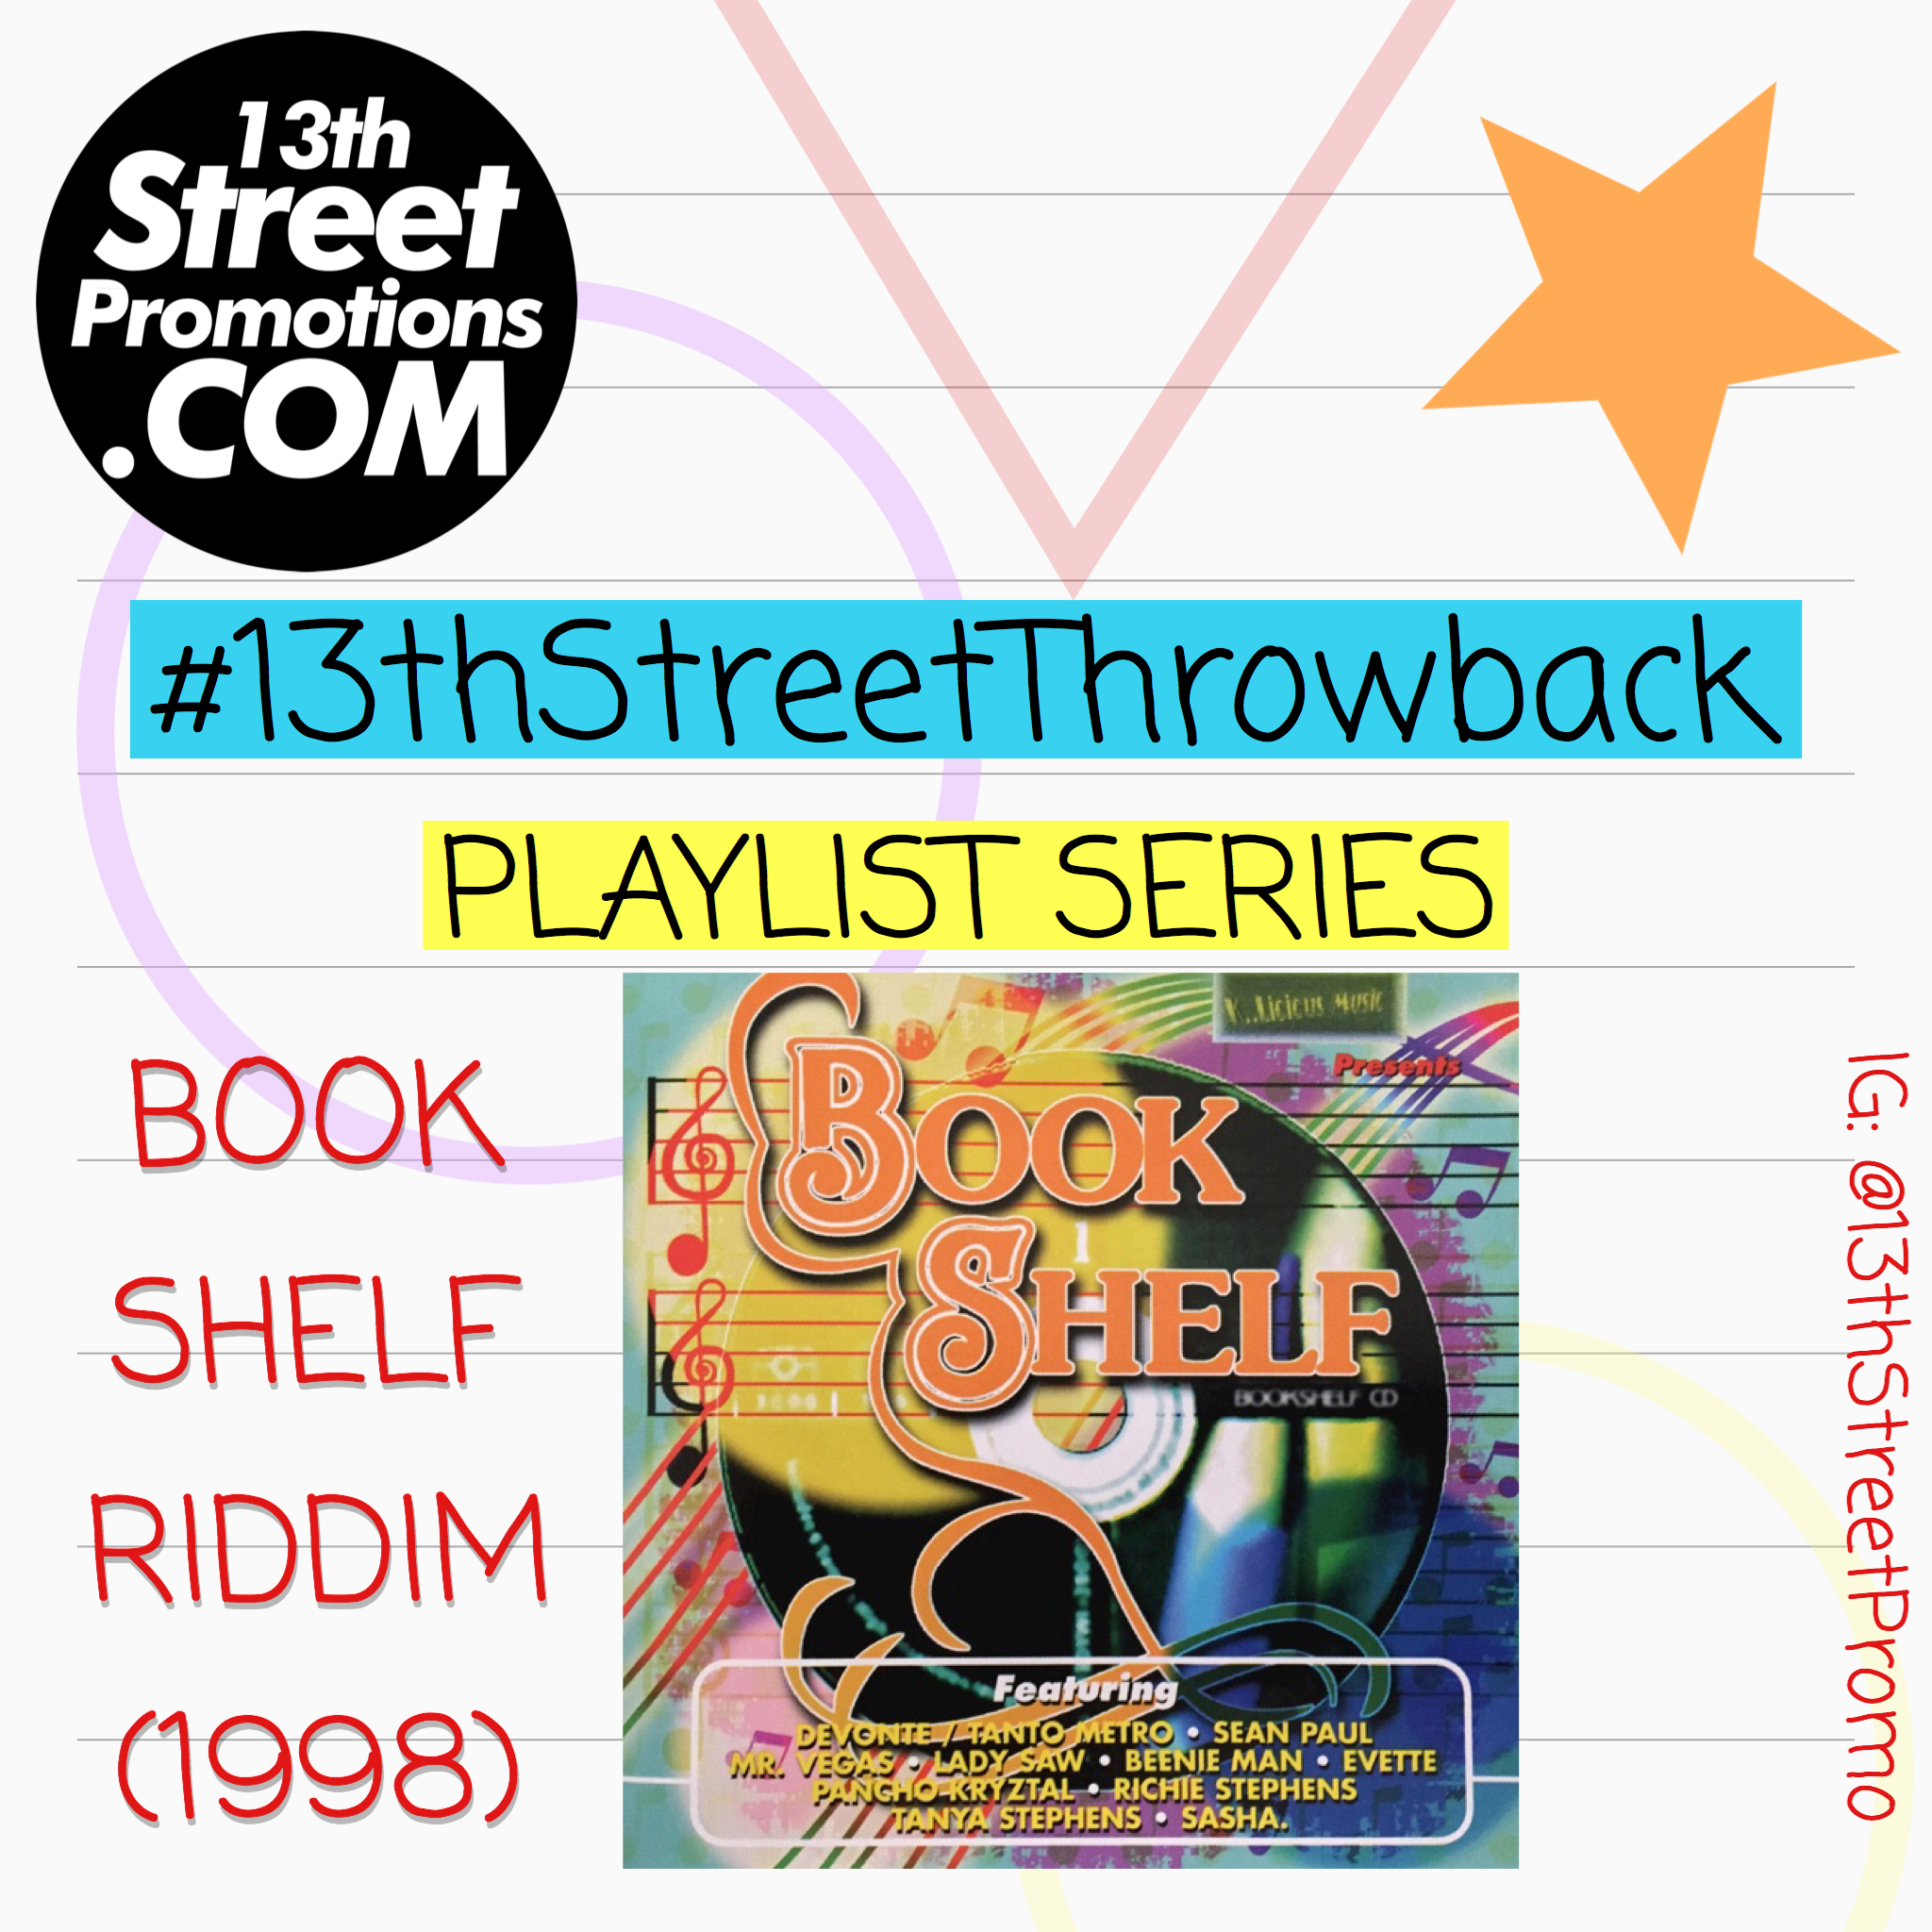 We Look Back At Tonycdkelly S Bookshelf Riddim In Our Throwback